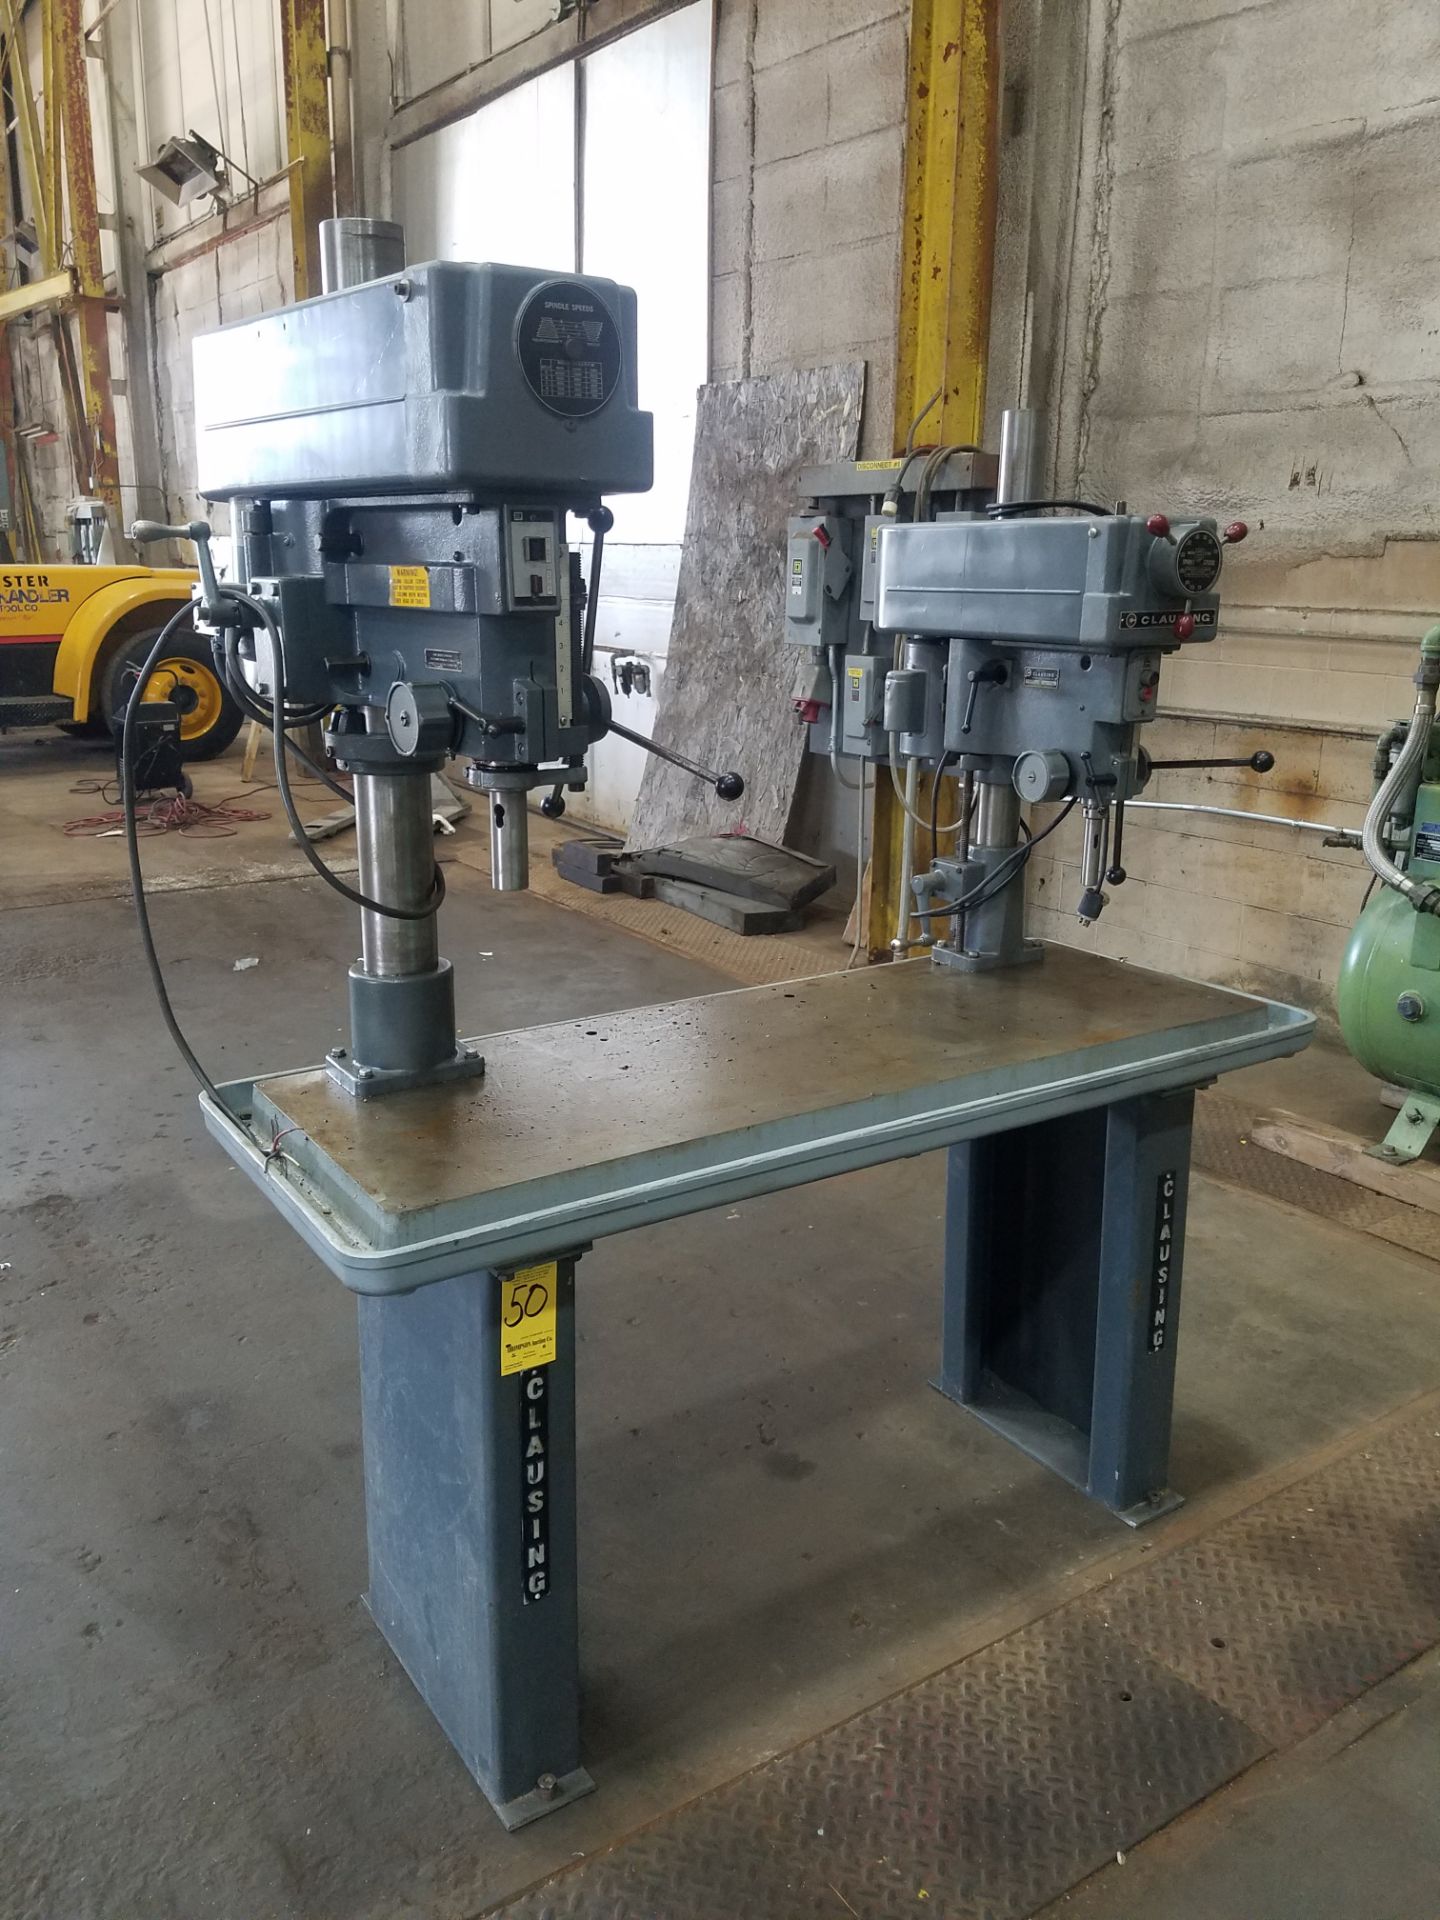 Clausing Twin Spindle Drill Press Mounted on 4-Spindle Production Table